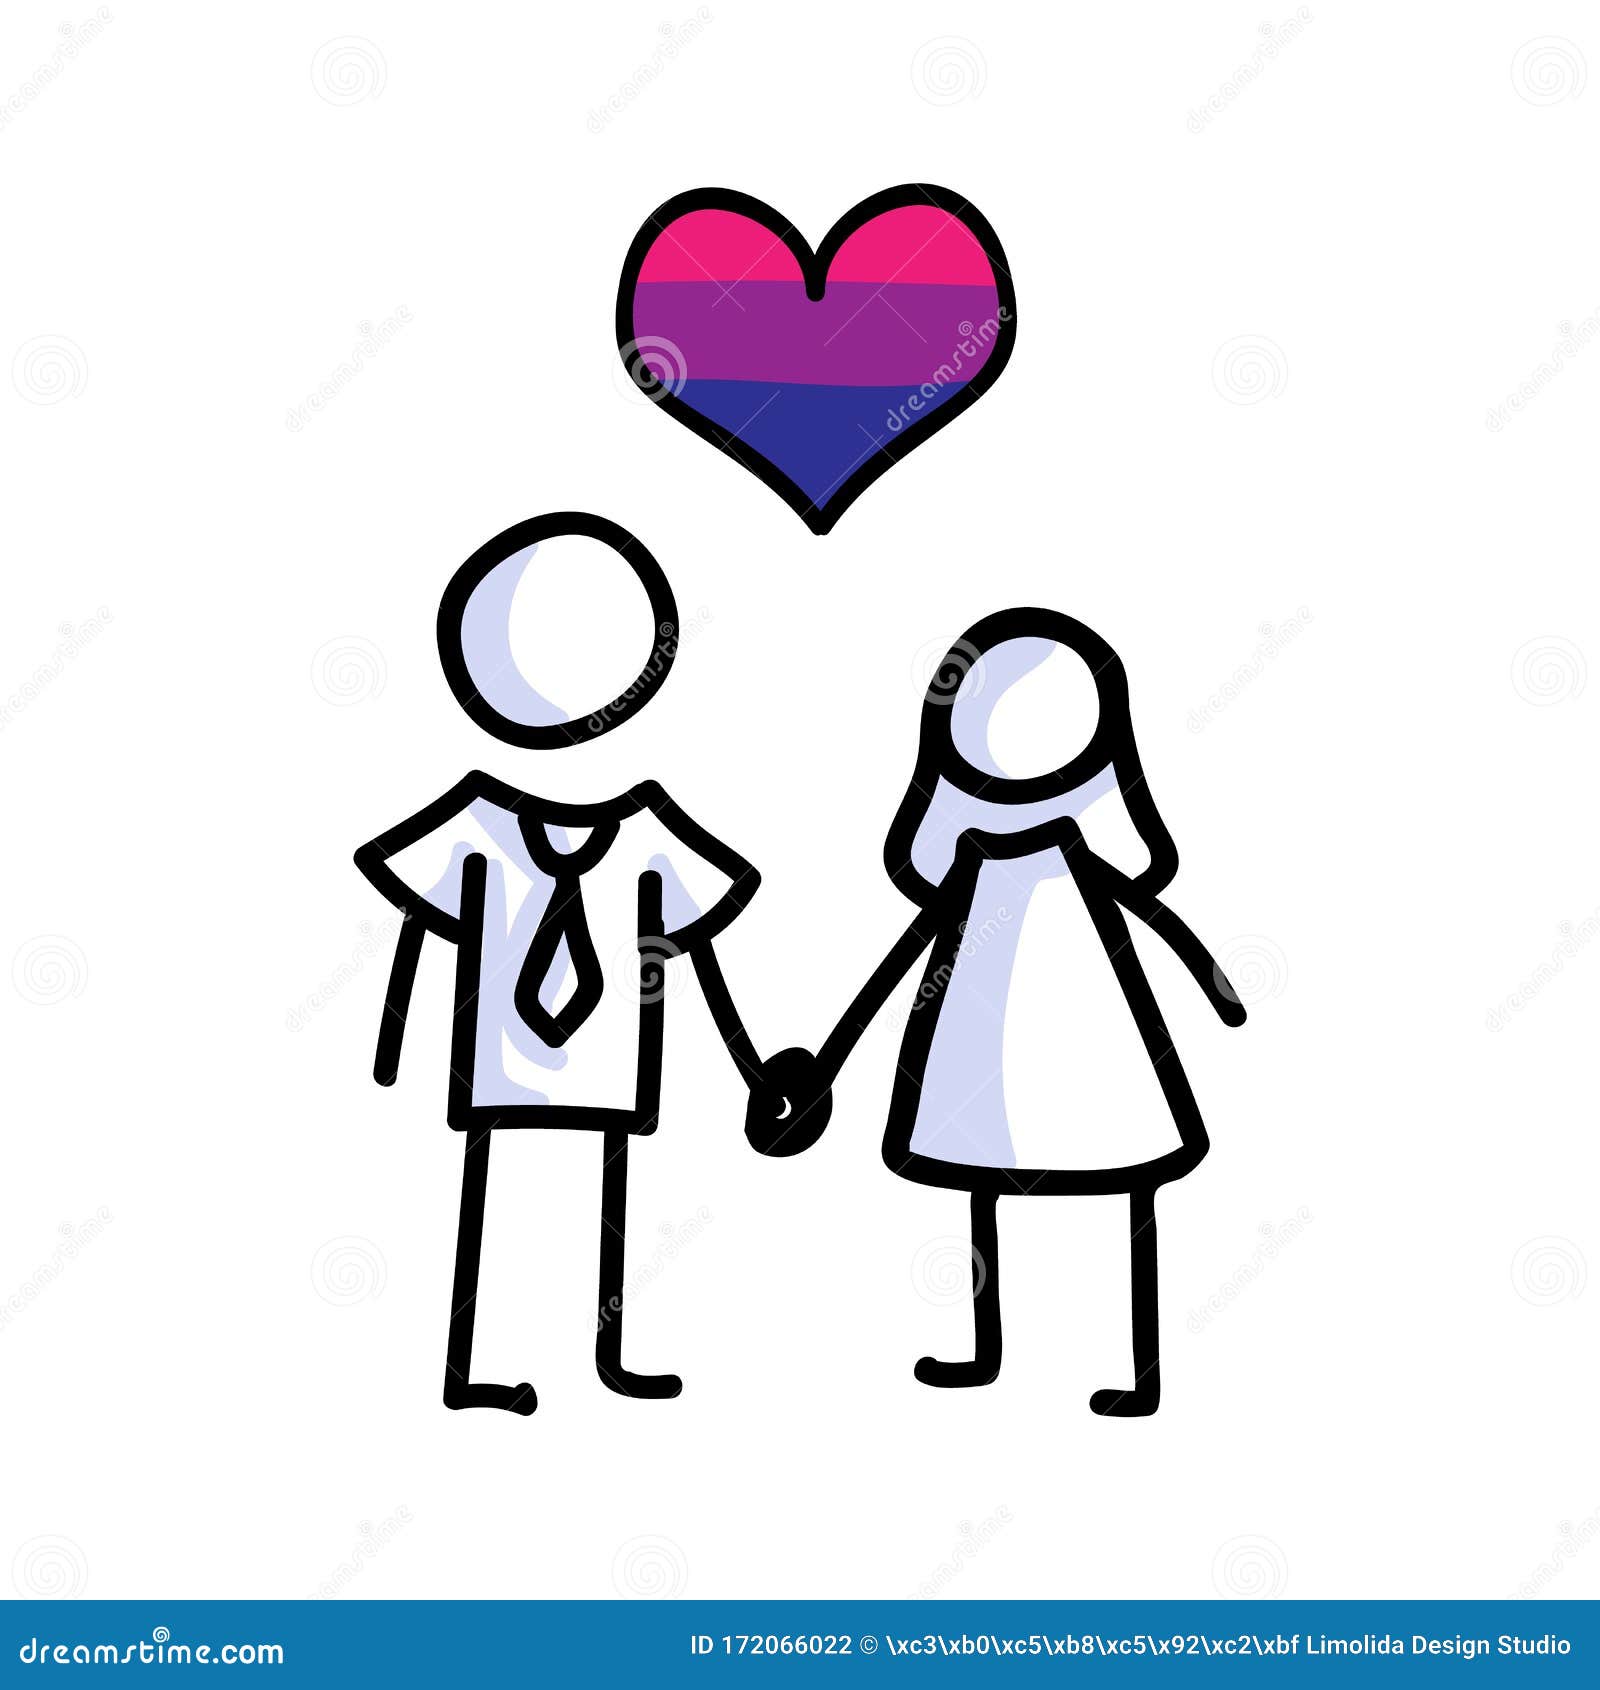 Hand Drawn Stick Figure of Bisexual Marriage picture